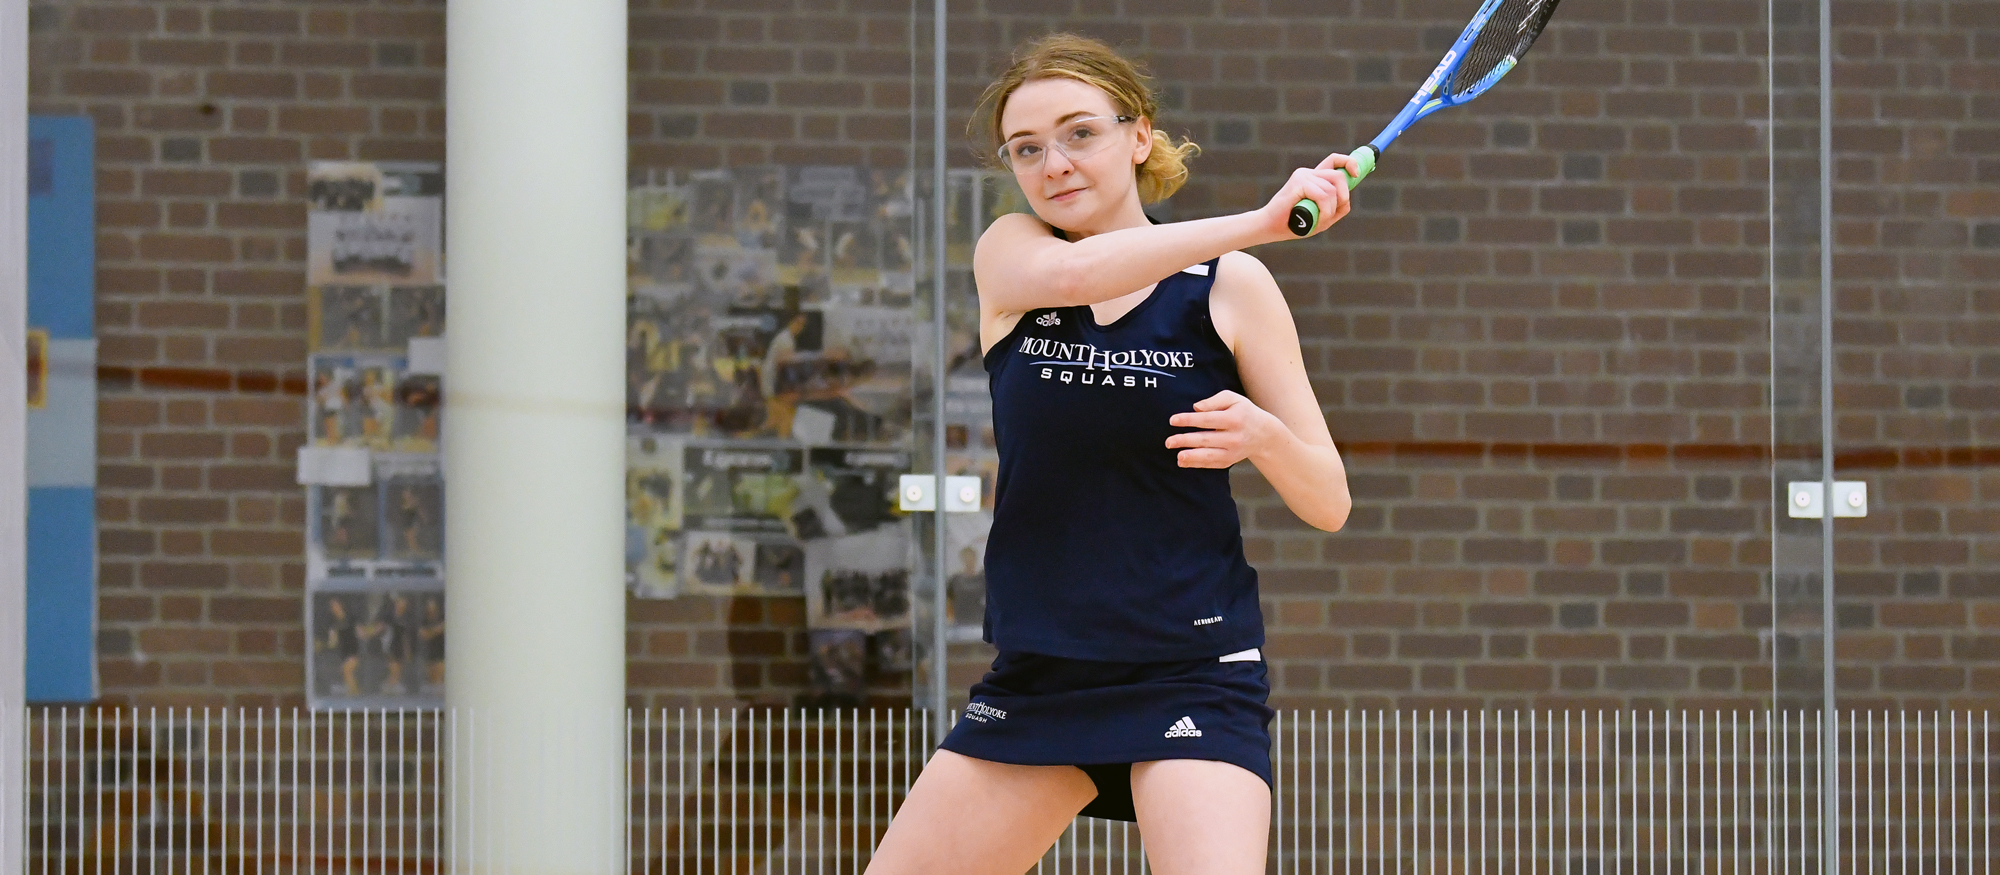 Paige Gershuny won 3-2 at the No. 8 position to score Mount Holyoke's point in an 8-1 loss to Haverford at CSA Team Nationals on Feb. 18, 2023. (RJB Sports file photo)